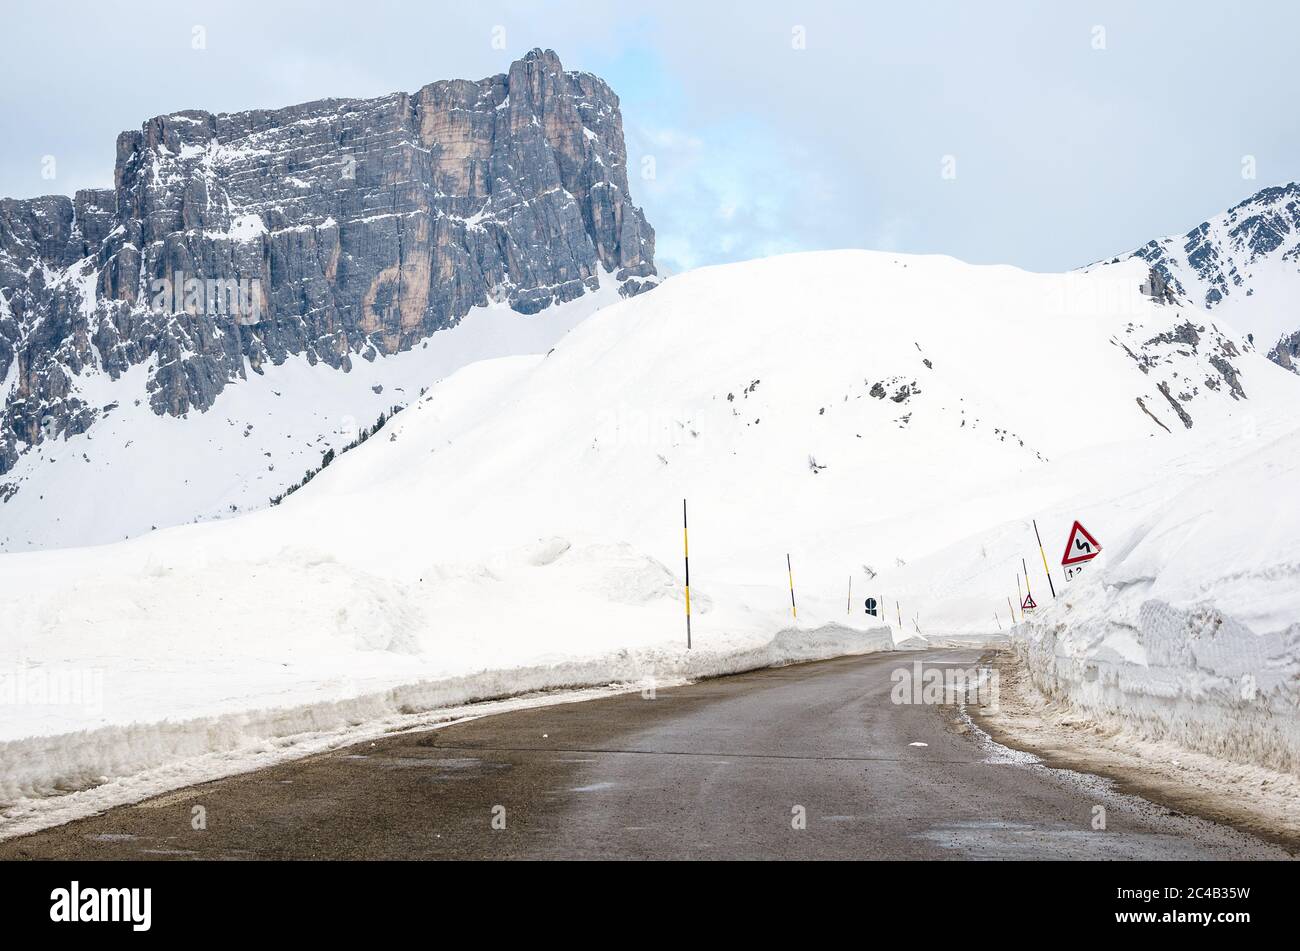 Deserted mountain pass road in the European Alps in winter. A towering rocky peak is visible in background. Stock Photo